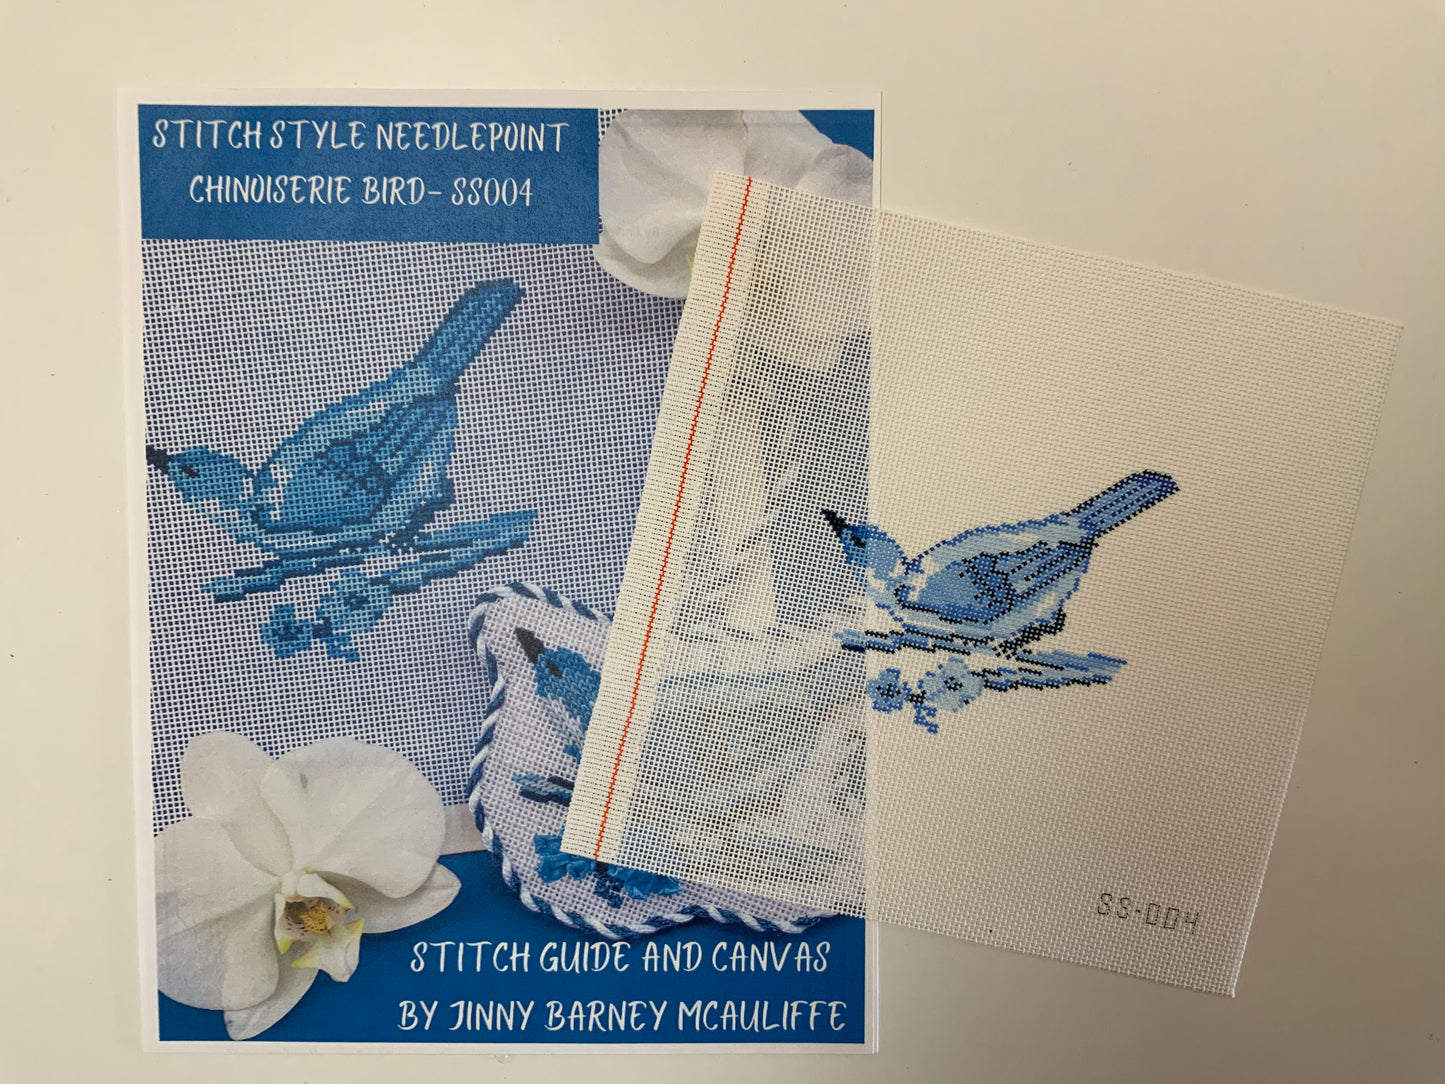 Chinoiserie Bird with Stitch Guide by Jinny Barney McAuliffe